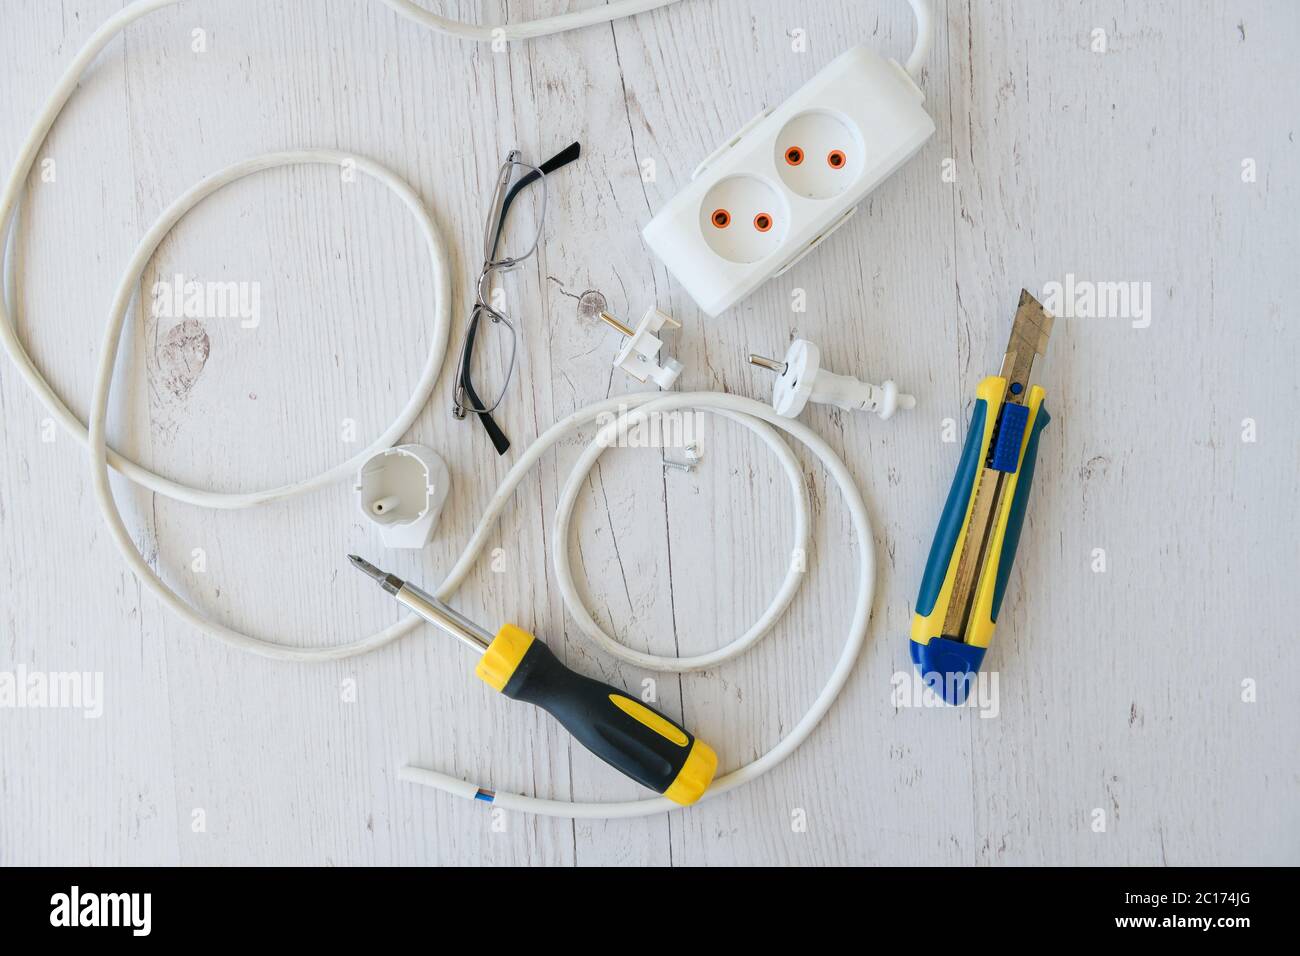 Repair electric extension plug cord with tools Stock Photo - Alamy